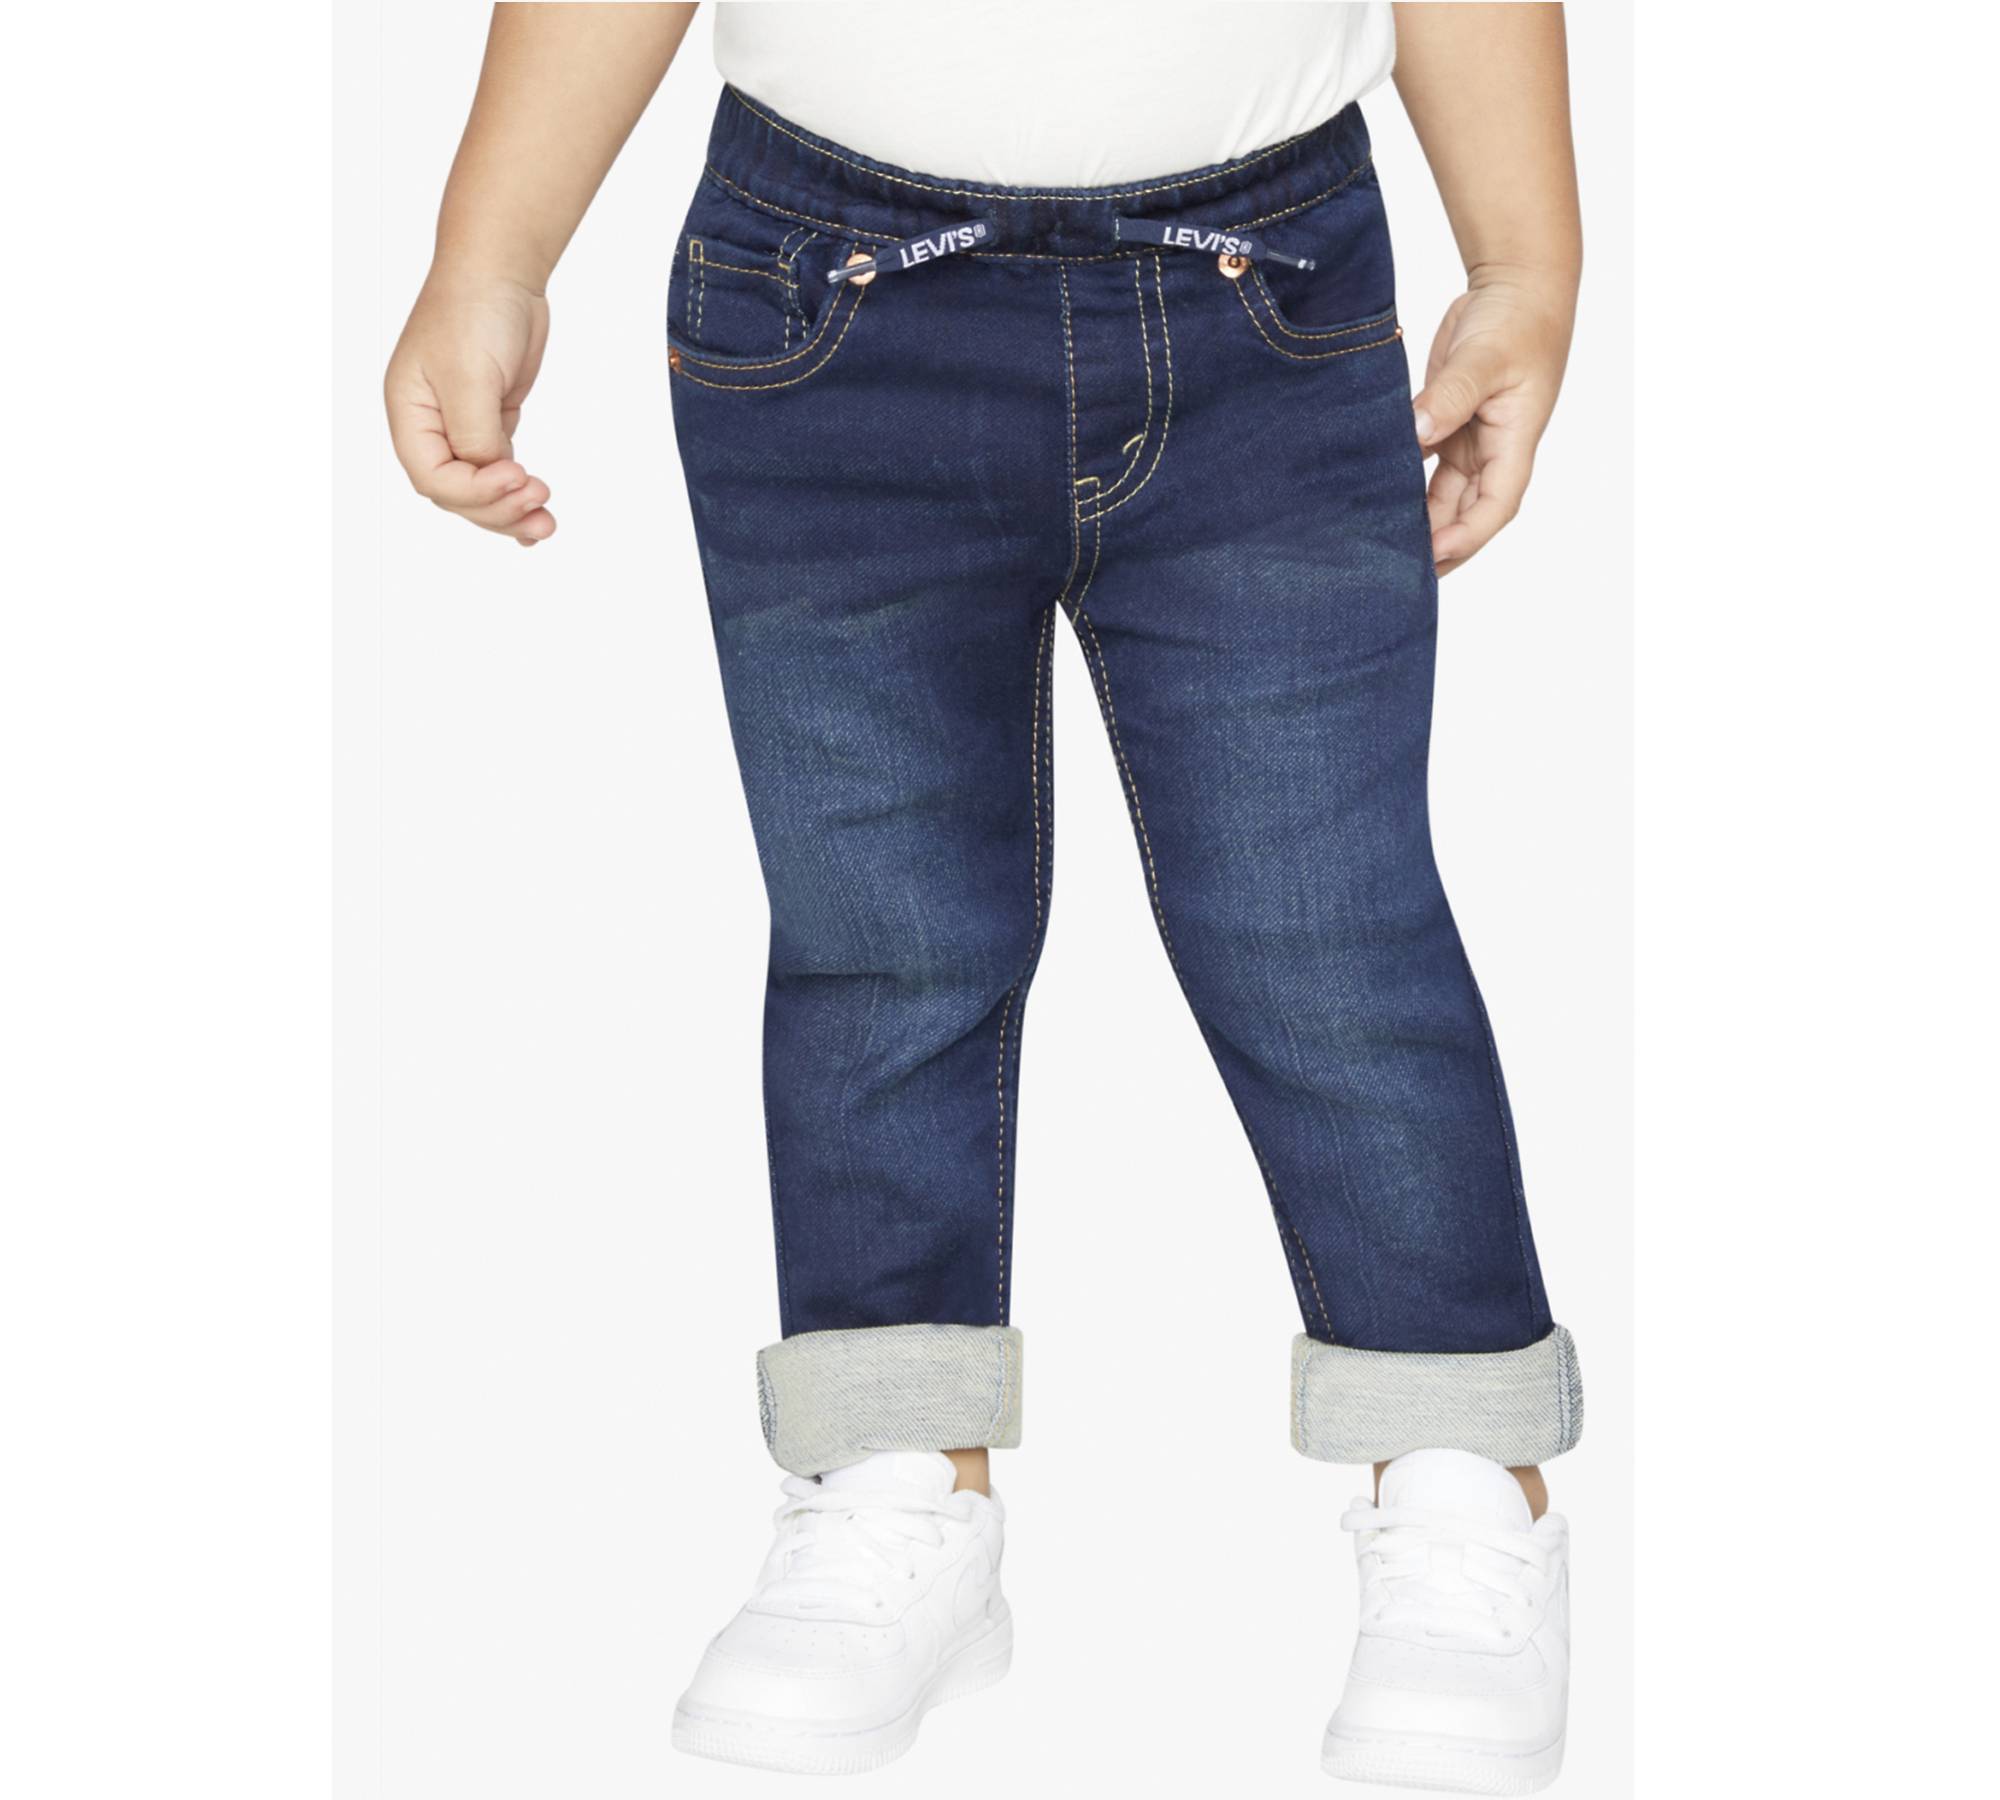 Pull On Skinny Fit Pants Toddler Boys 2T-4T 1